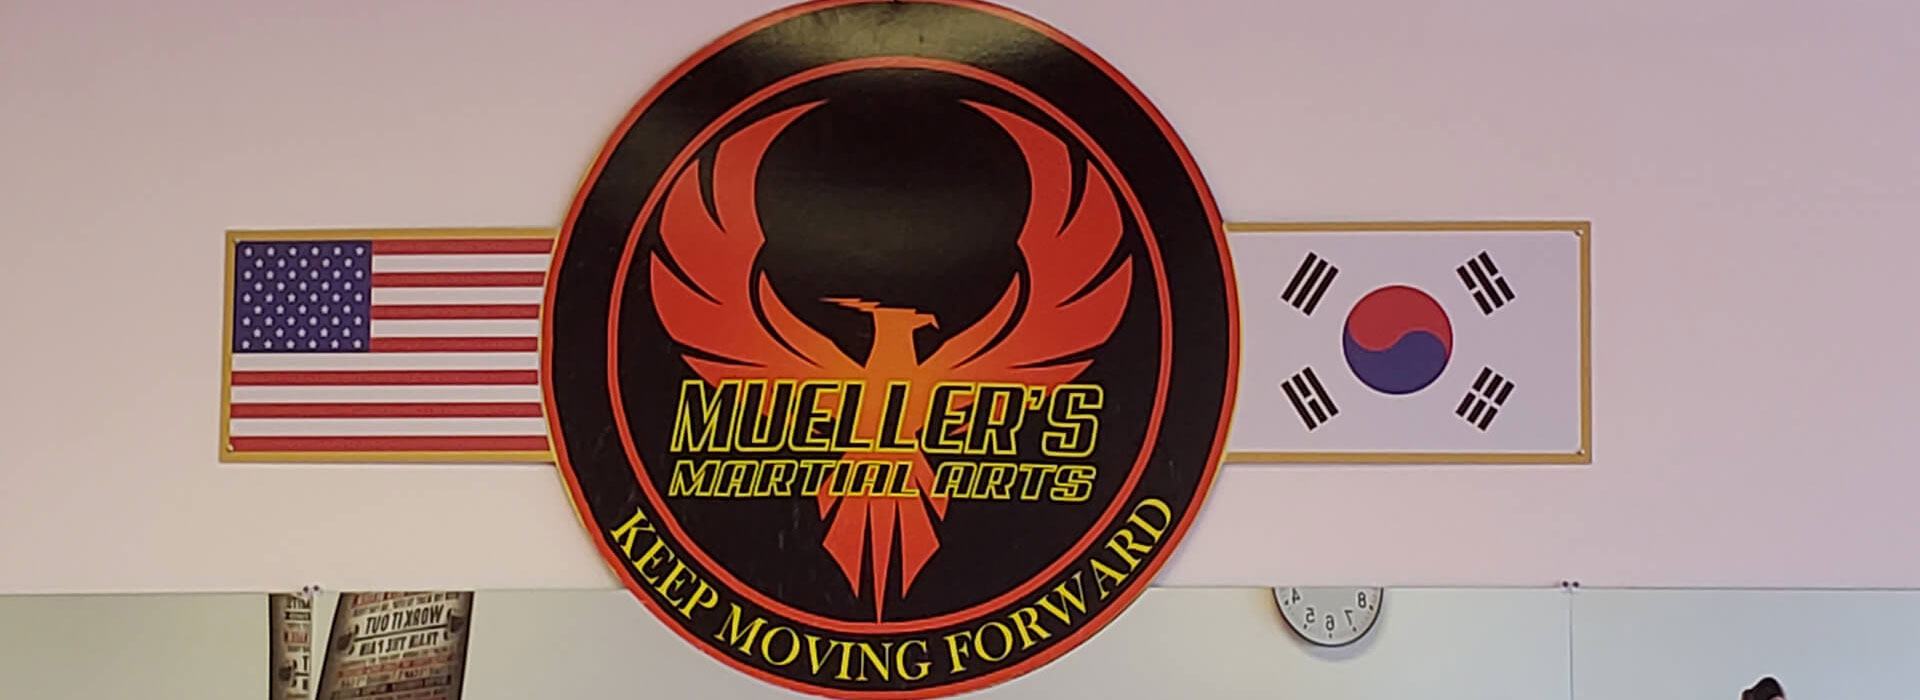 Why Mueller's Martial Arts Is Ranked One of the Best Martial Arts Schools In Lakewood, Colorado